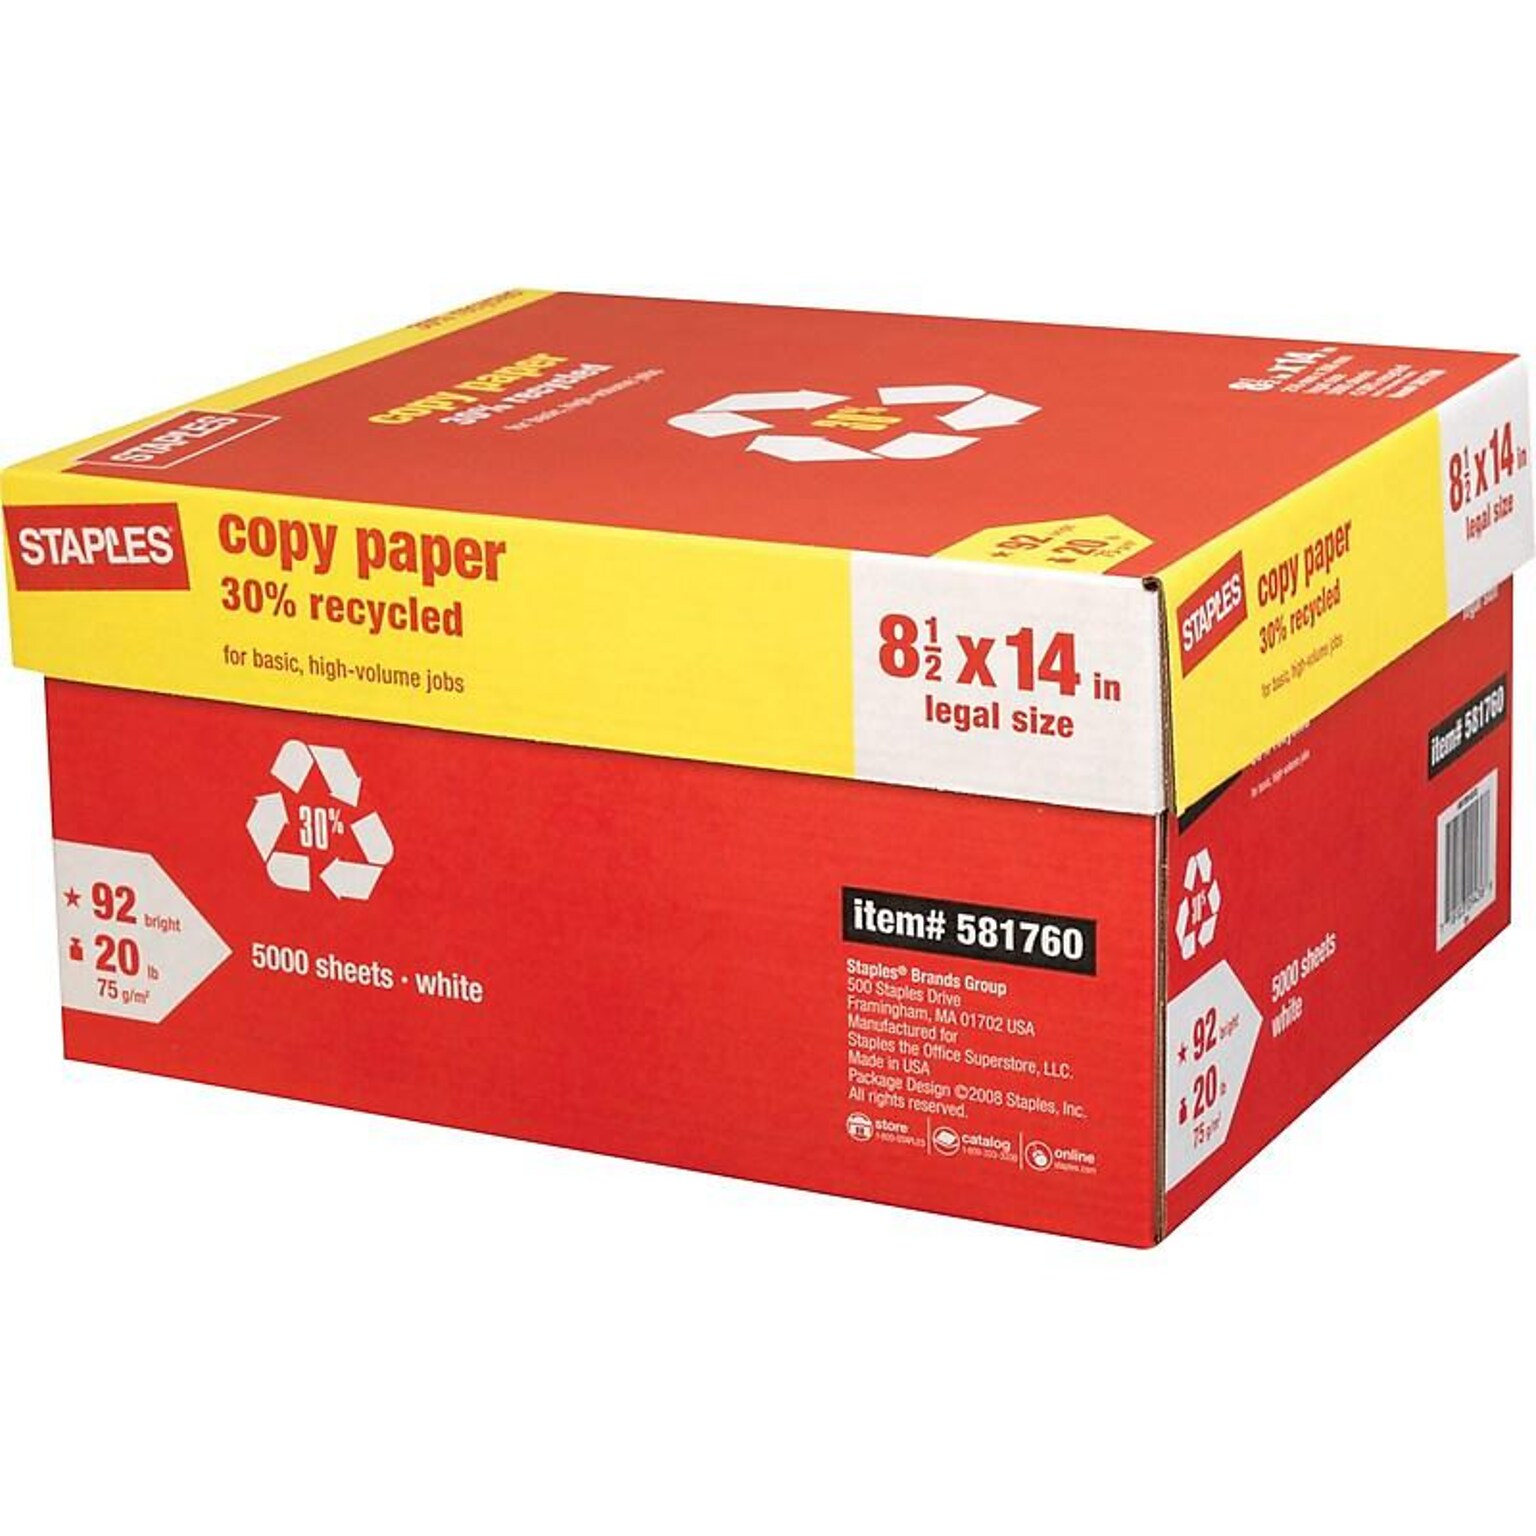 Staples 30% Recycled Copy Paper, 8.5 x 14, 20 lbs., White, 500 Sheets/Ream, 10 Reams/Carton (112380)